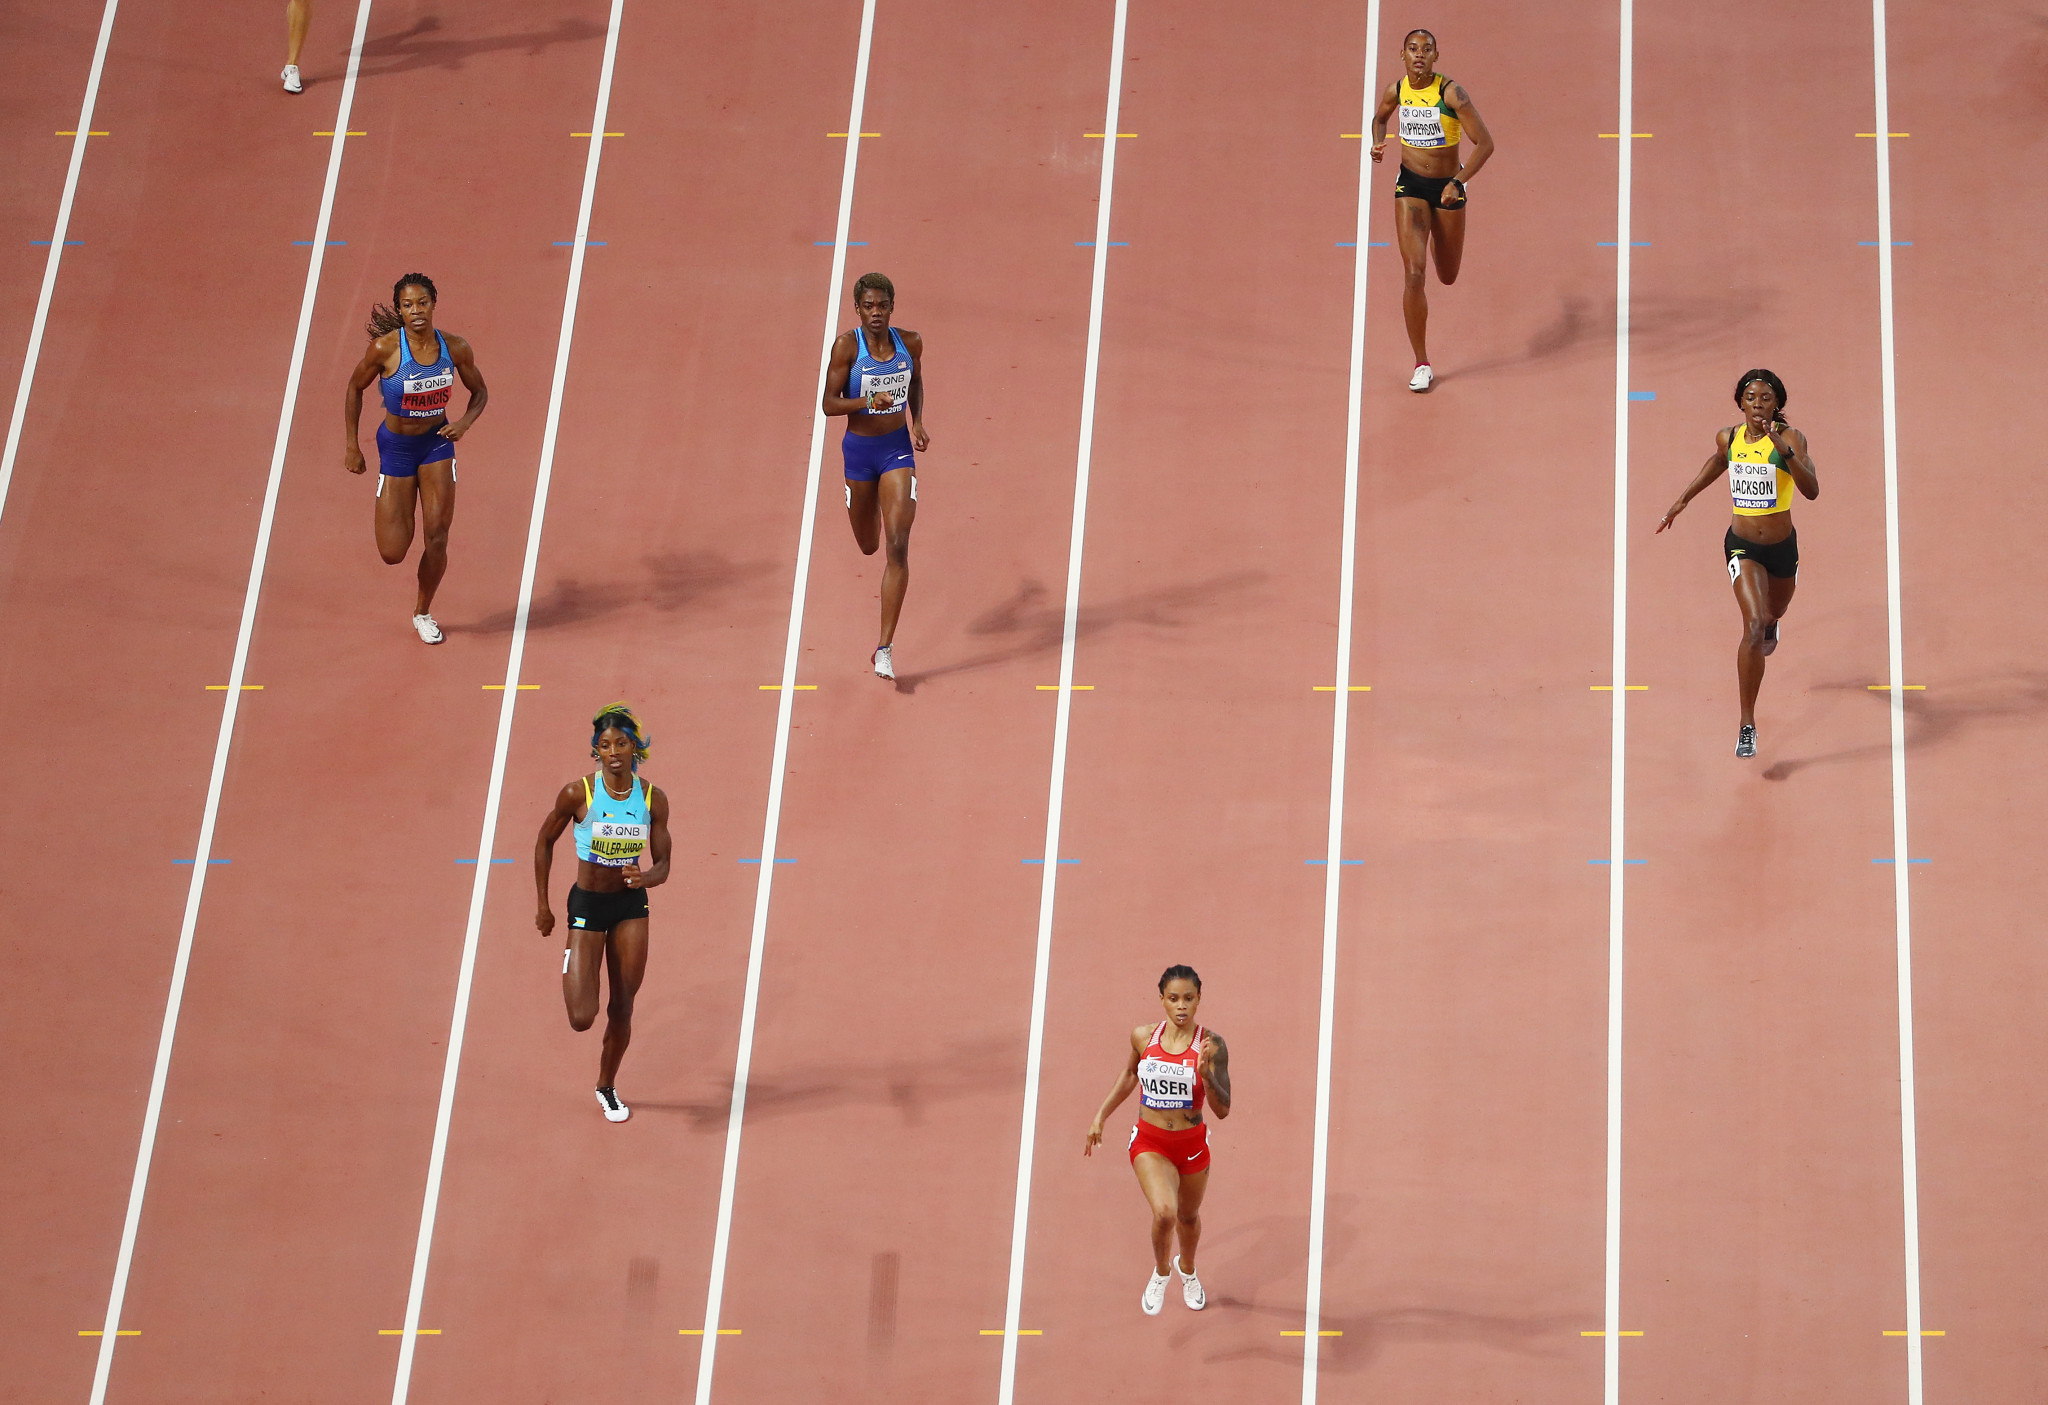 Salwa Eid Naser of Bahrain clocks 48.14 to win the women's world 400m title, with Rio 2016 champion Shaunae Miller-Uibo taking more than half a second off her best in second place ©Getty Images